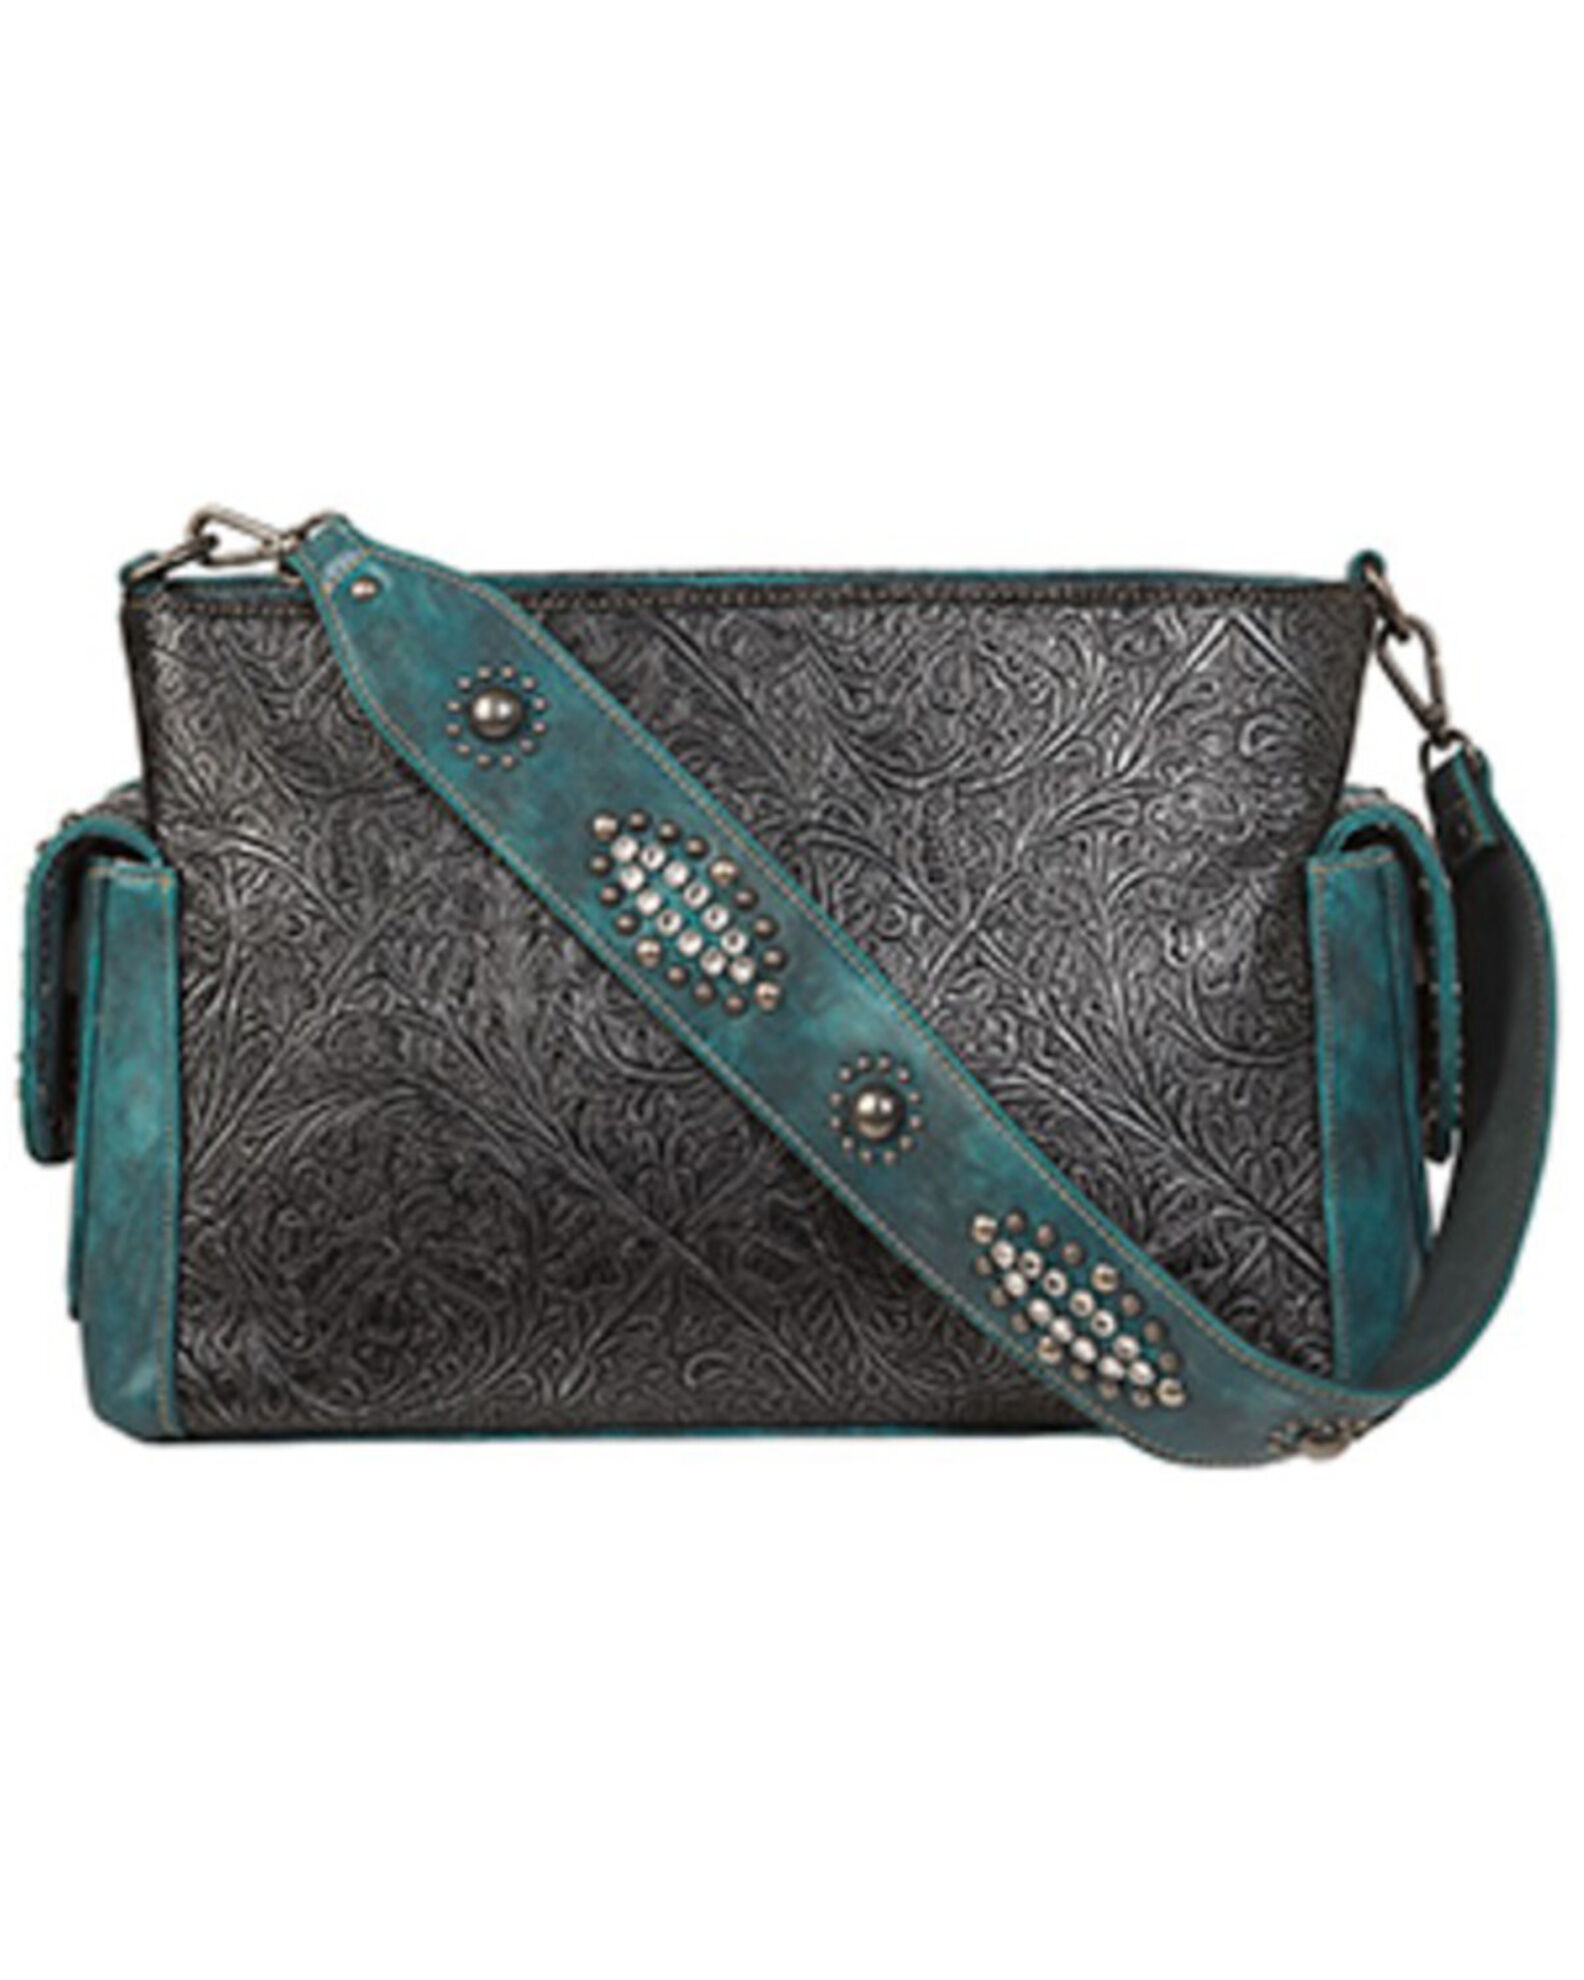 Embroidered Lambskin Purse a Leather Concealed Carry Purse